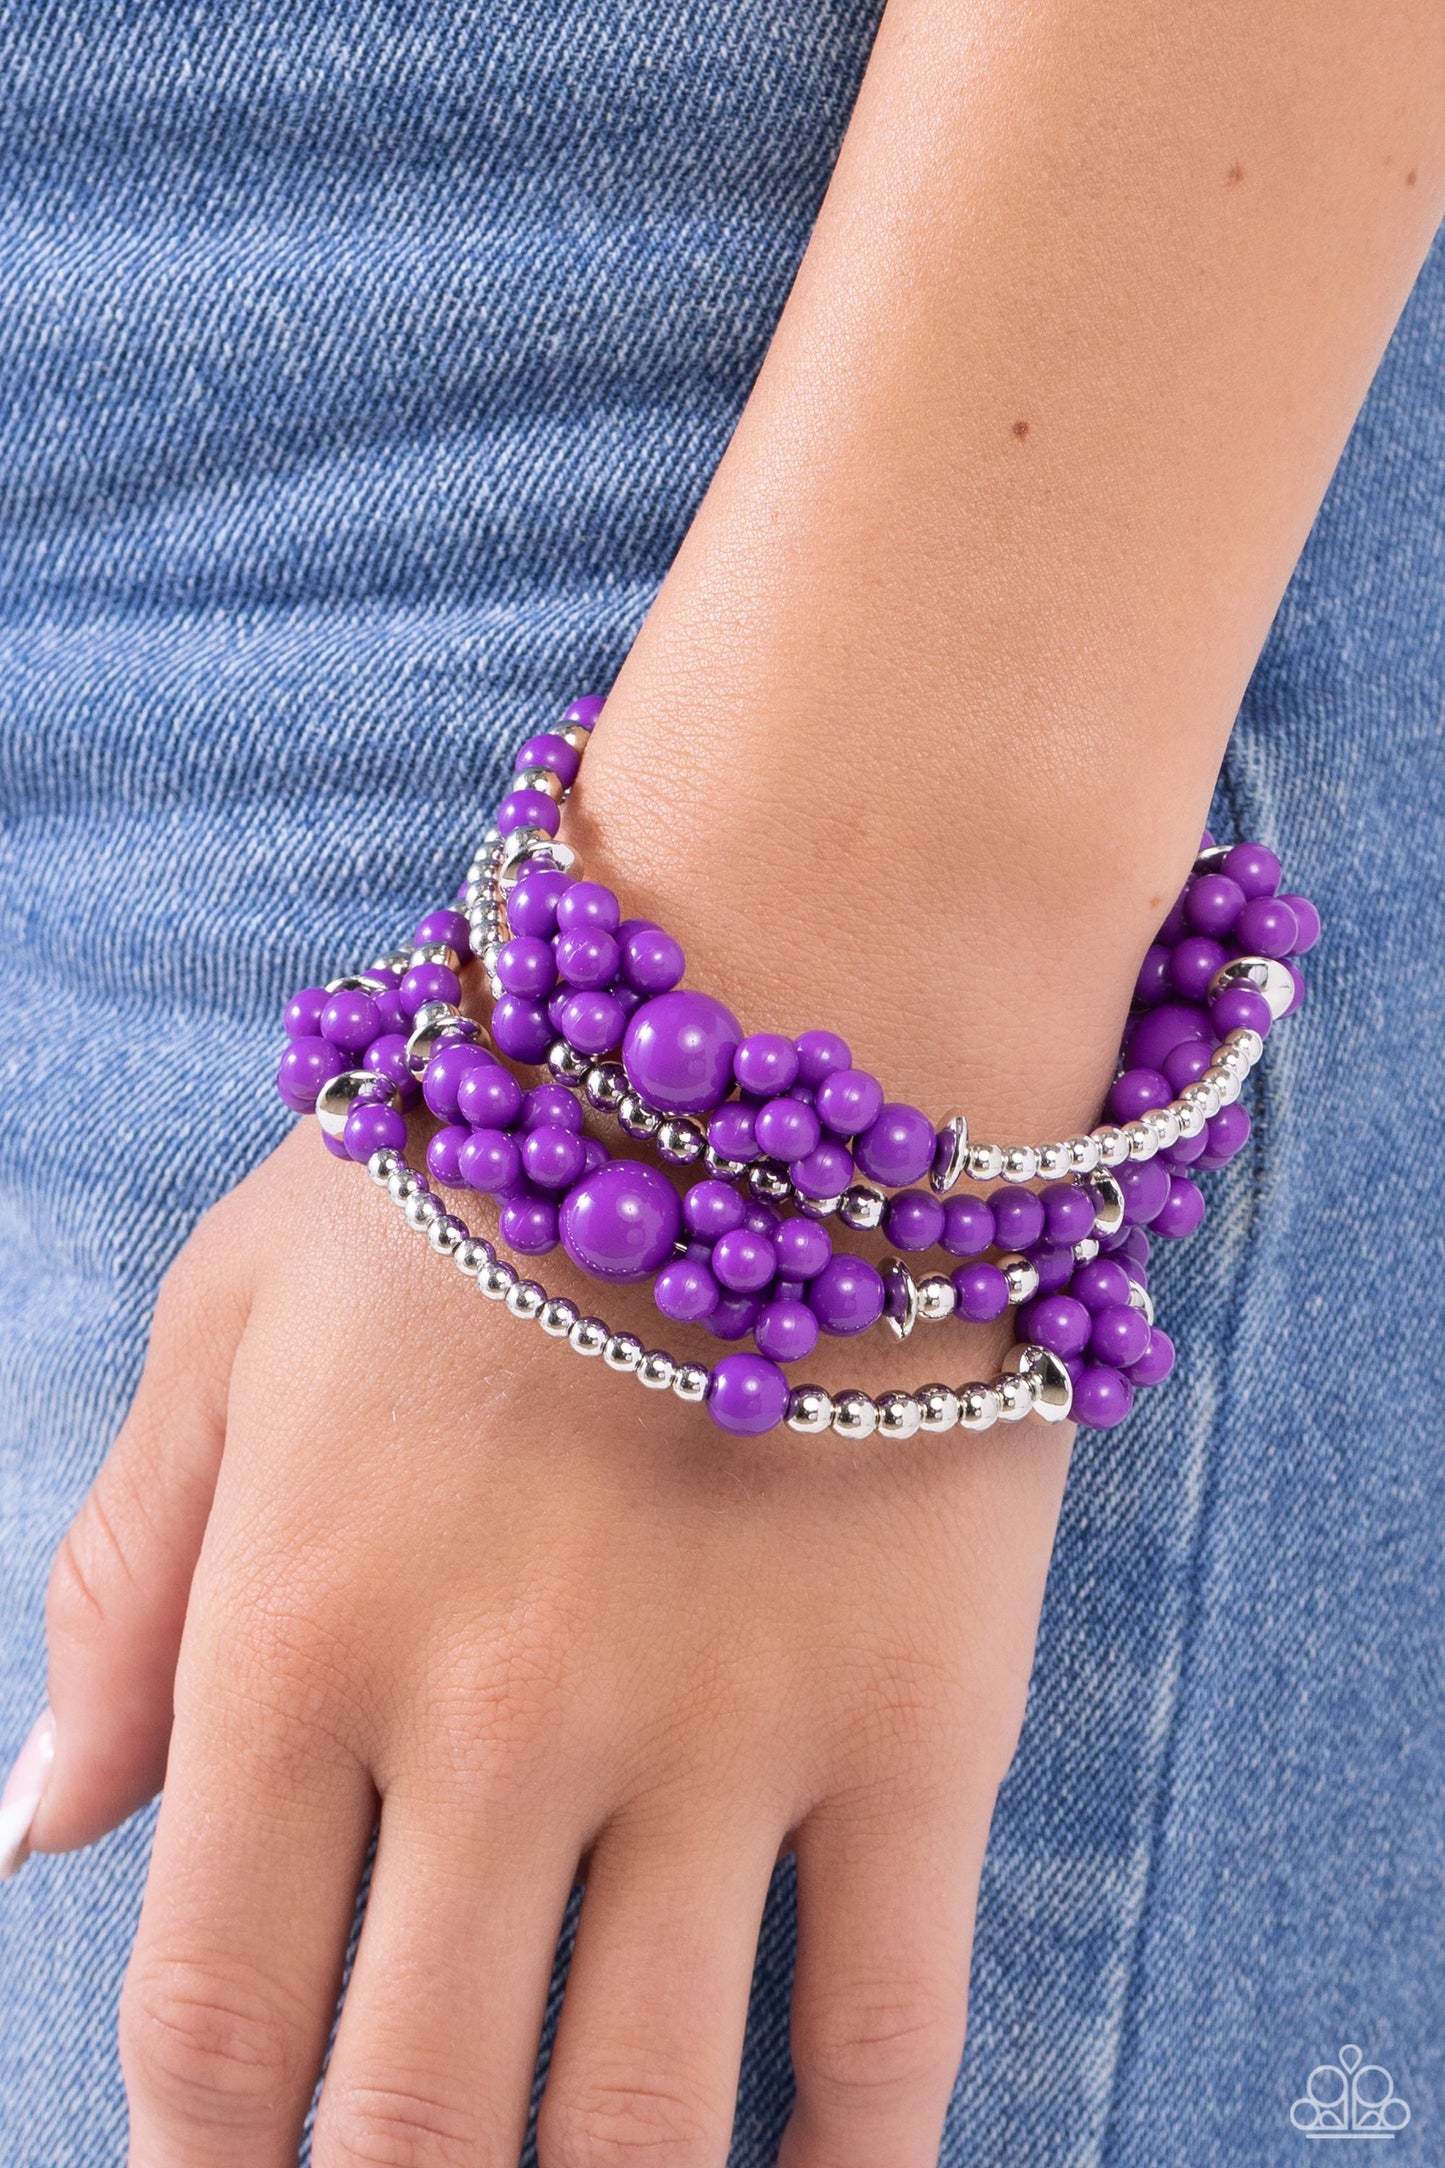 Compelling Clouds - Purple Infinity Wrap Bracelet - Paparazzi Accessories - Strands of sleek silver beads and accents mixed with plum acrylic beads in varying sizes are threaded along an infinity wrap-style bracelet. Clusters of beads are sporadically infused along the design, creating cloud-like, ethereal layers around the wrist.